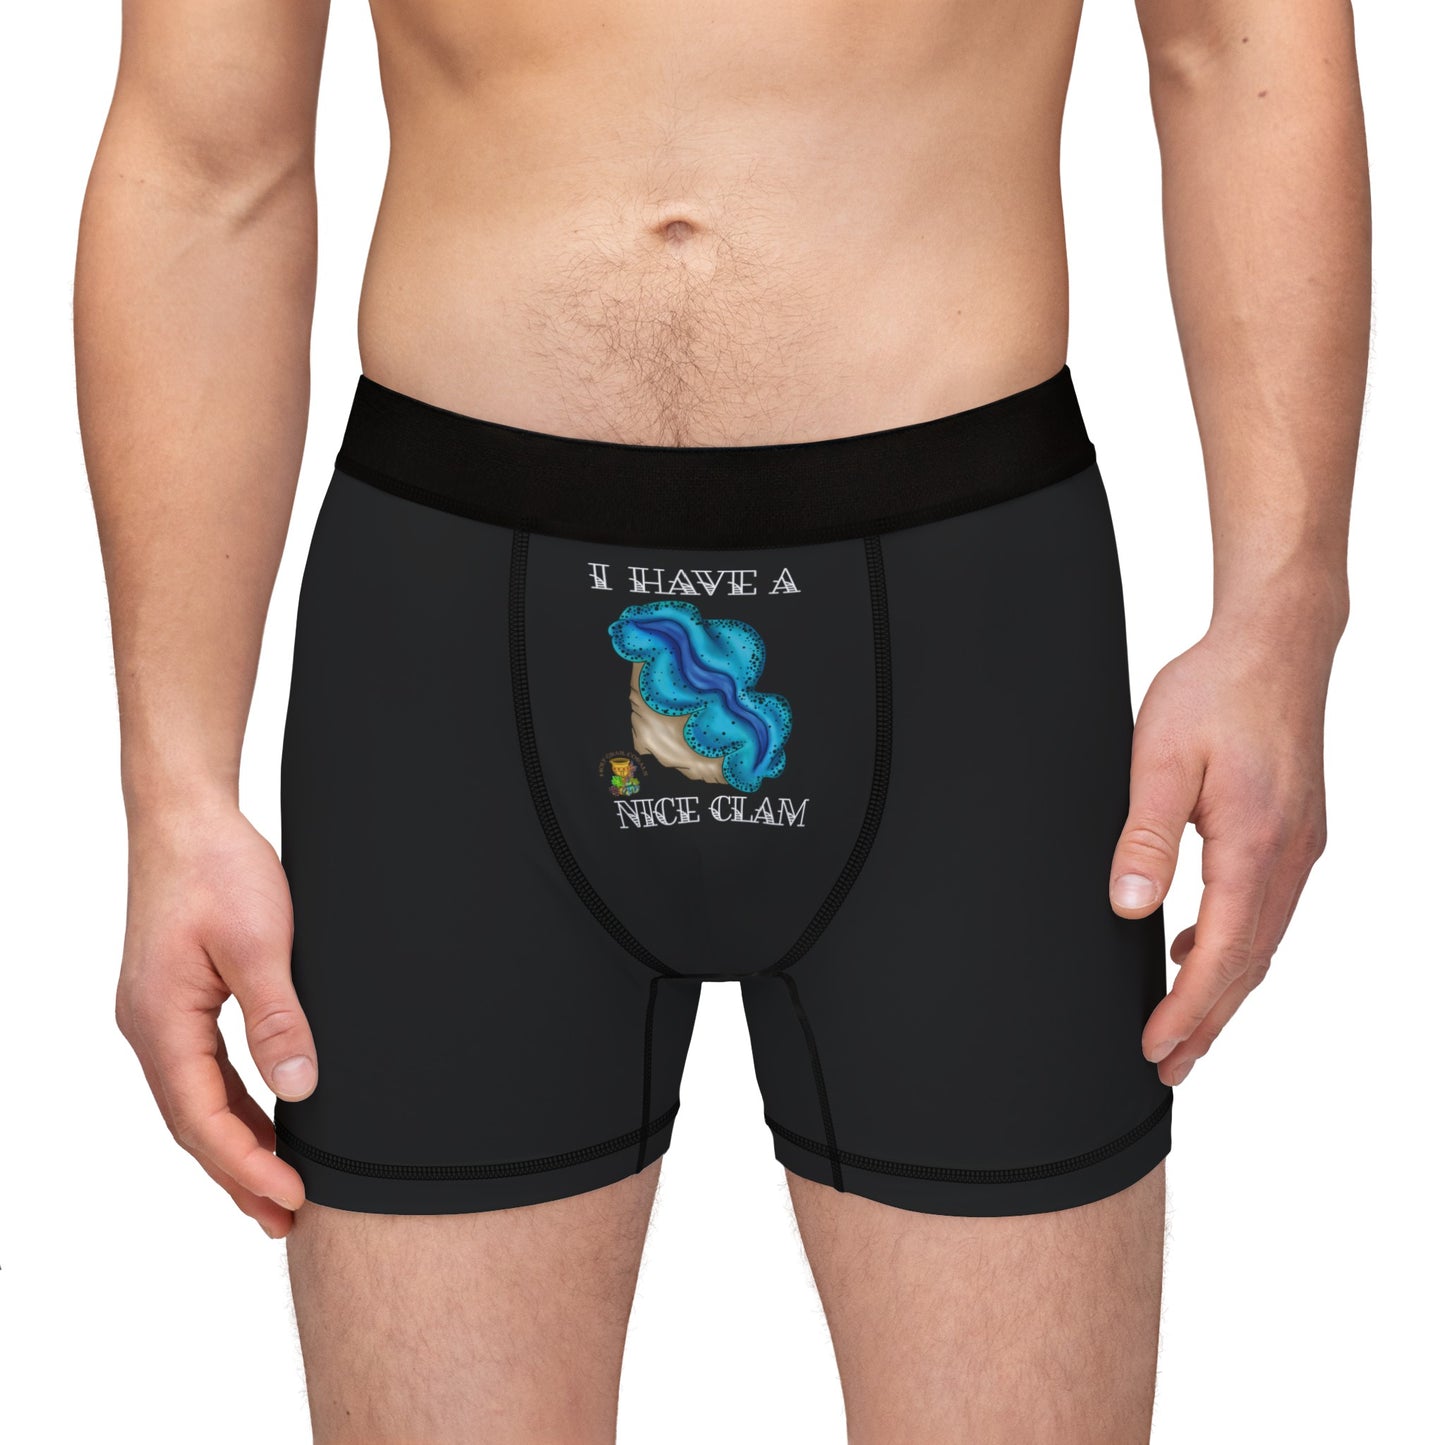 "I Have A Nice Clam" Maxima Clam Men's Boxers